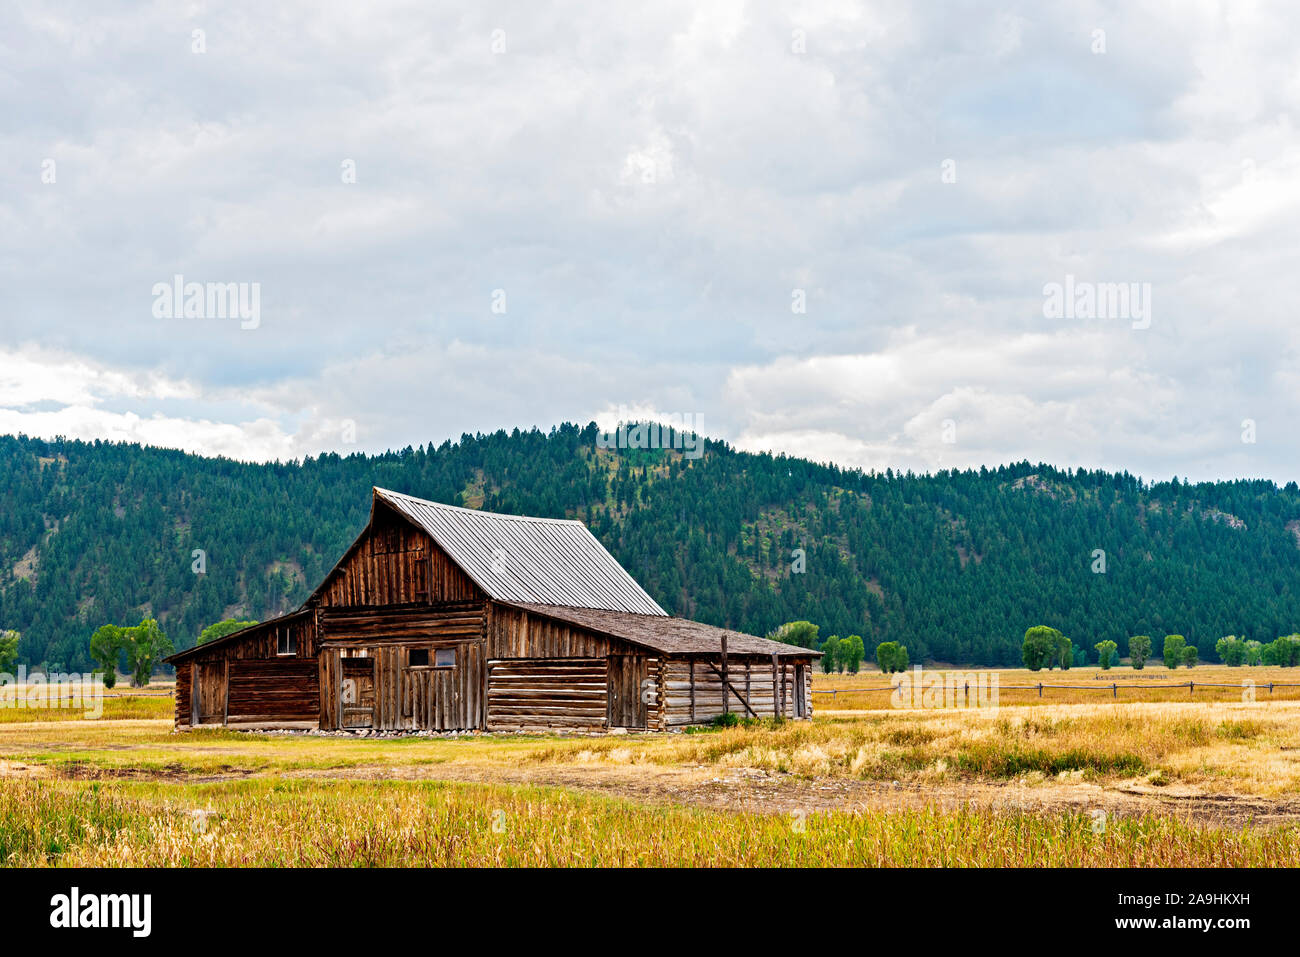 Old pioneer barn in golden grass fields with green mountain beyond under cloudy skies. Stock Photo